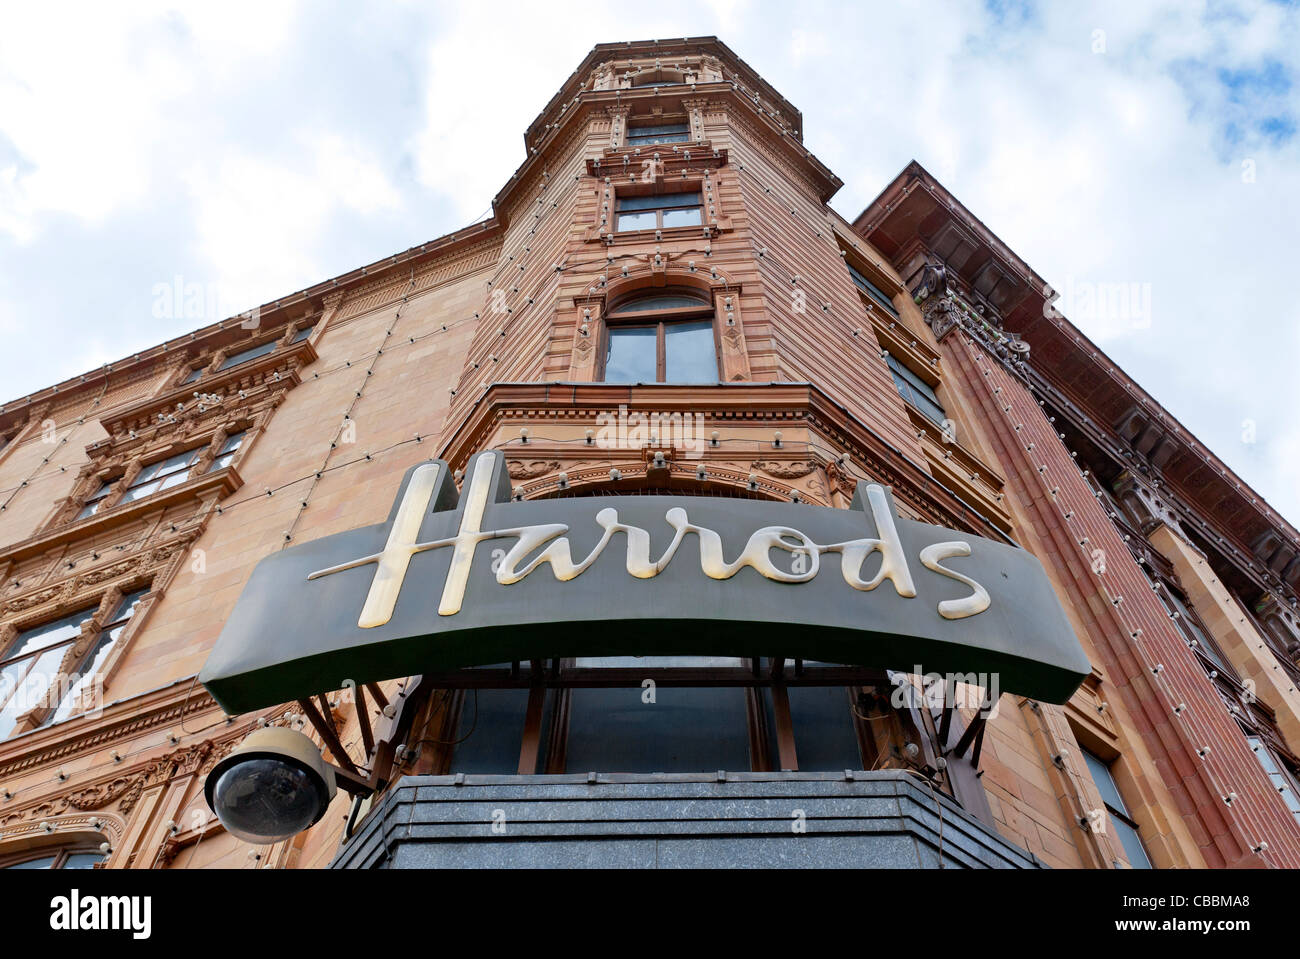 Exterior of Harrods Department Store in London, England. Stock Photo